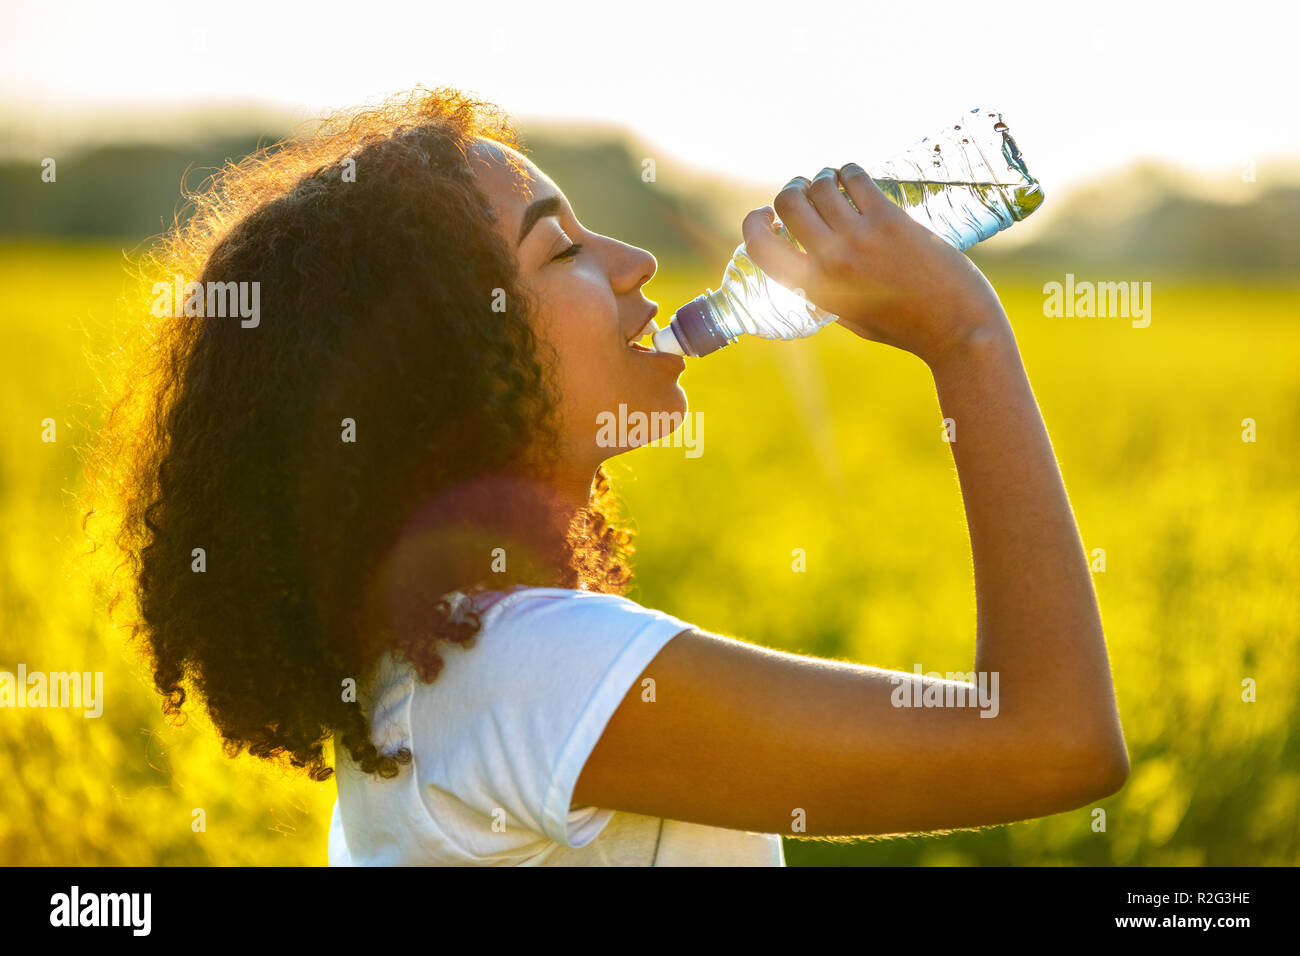 https://c8.alamy.com/comp/R2G3HE/outdoor-portrait-of-beautiful-happy-mixed-race-african-american-girl-teenager-female-young-woman-drinking-water-from-a-bottle-in-a-field-of-yellow-flo-R2G3HE.jpg